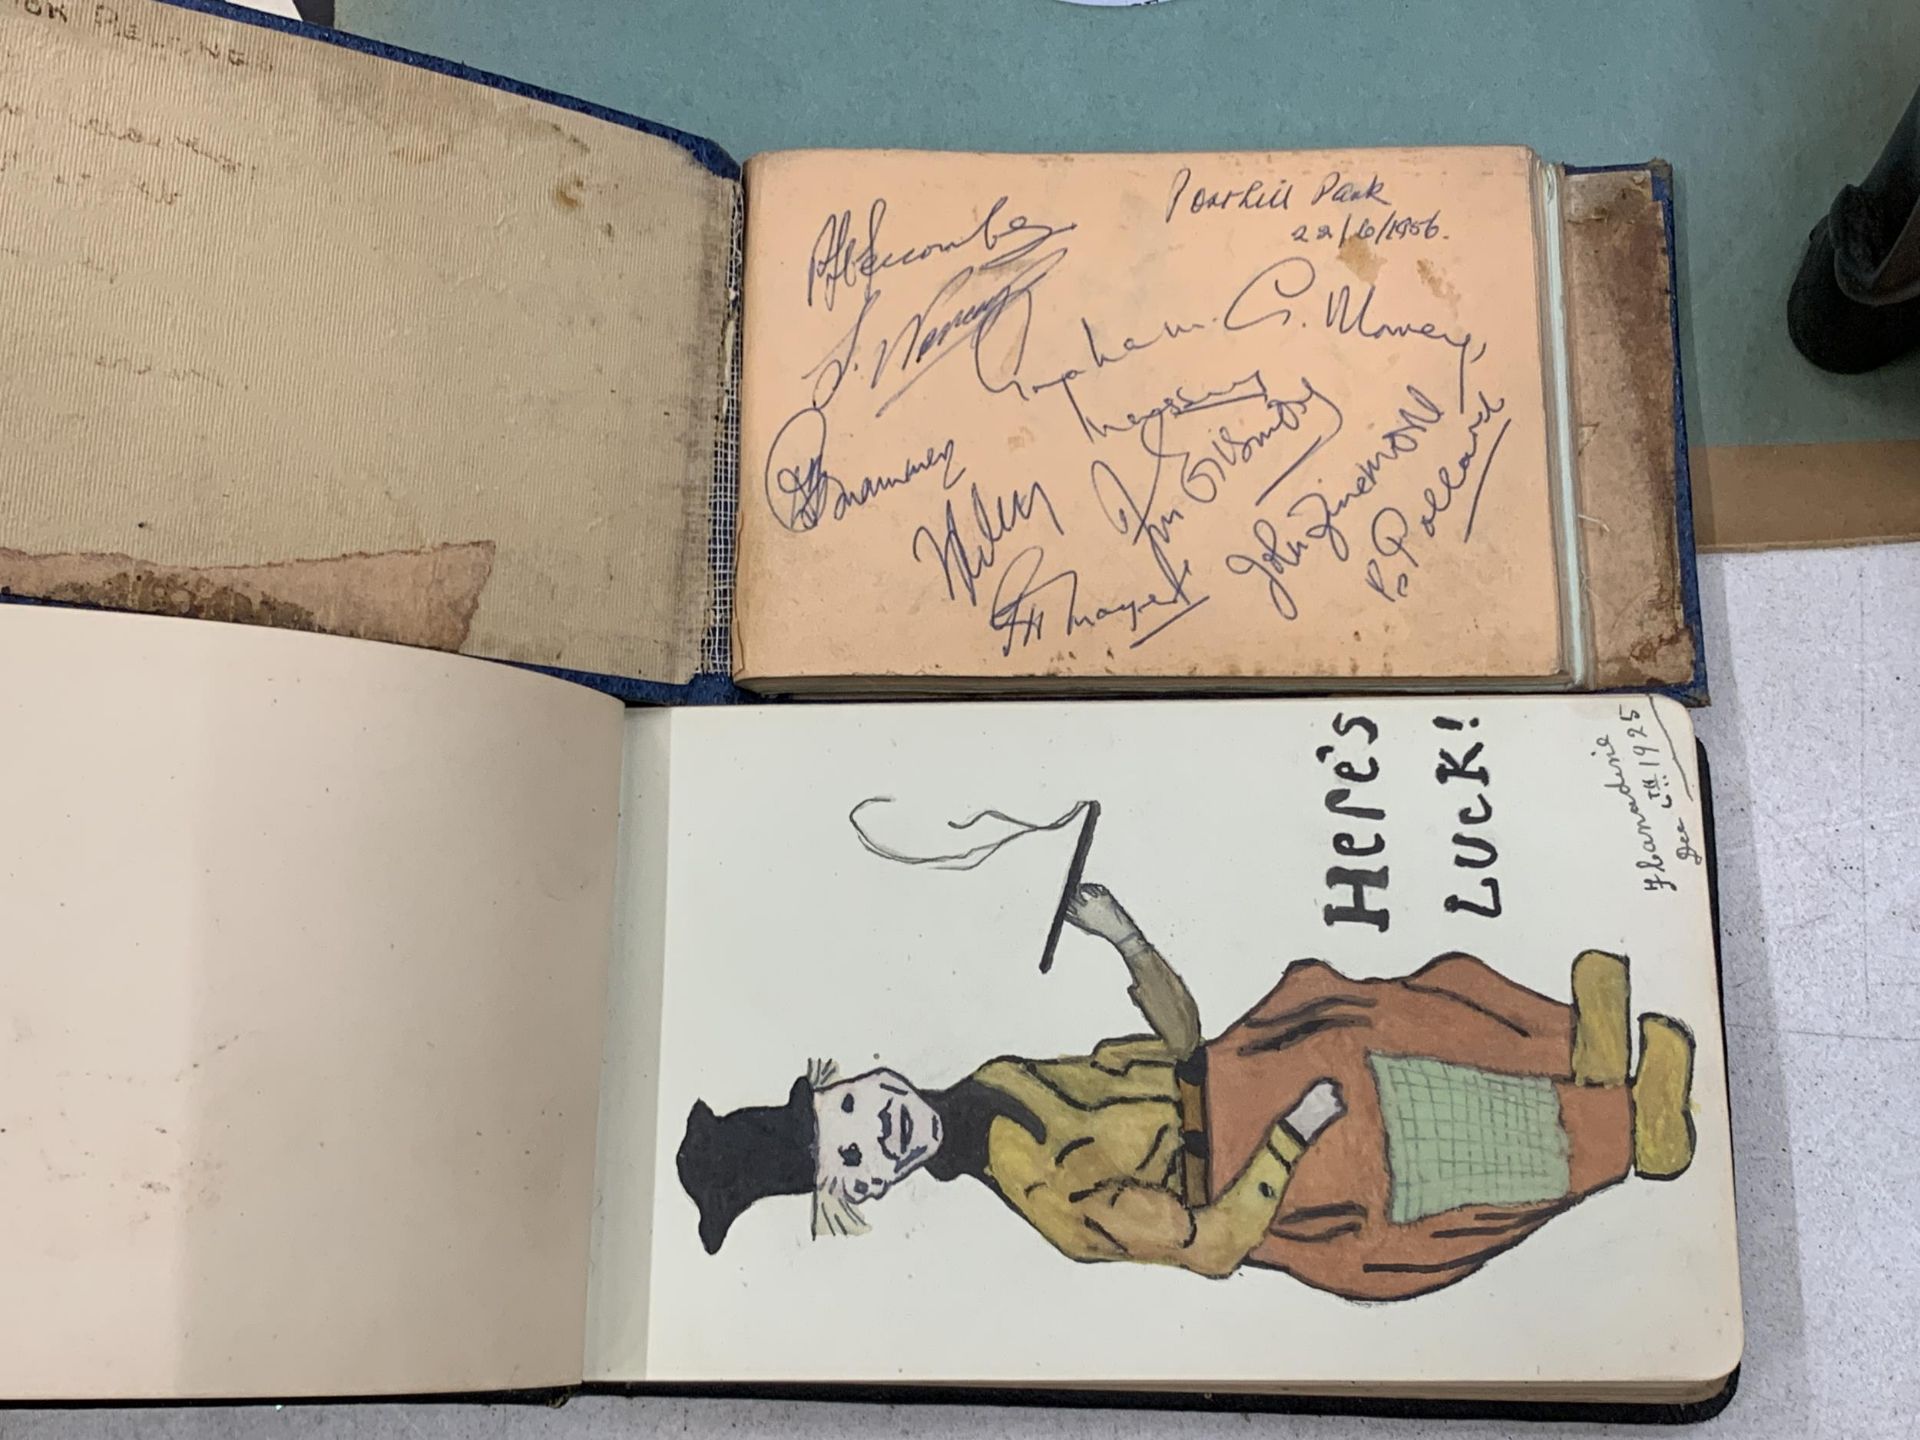 TWO AUTOGRAPH BOOKS, ONE FROM THE 1920'S, THE OTHER 1950'S - Image 4 of 4